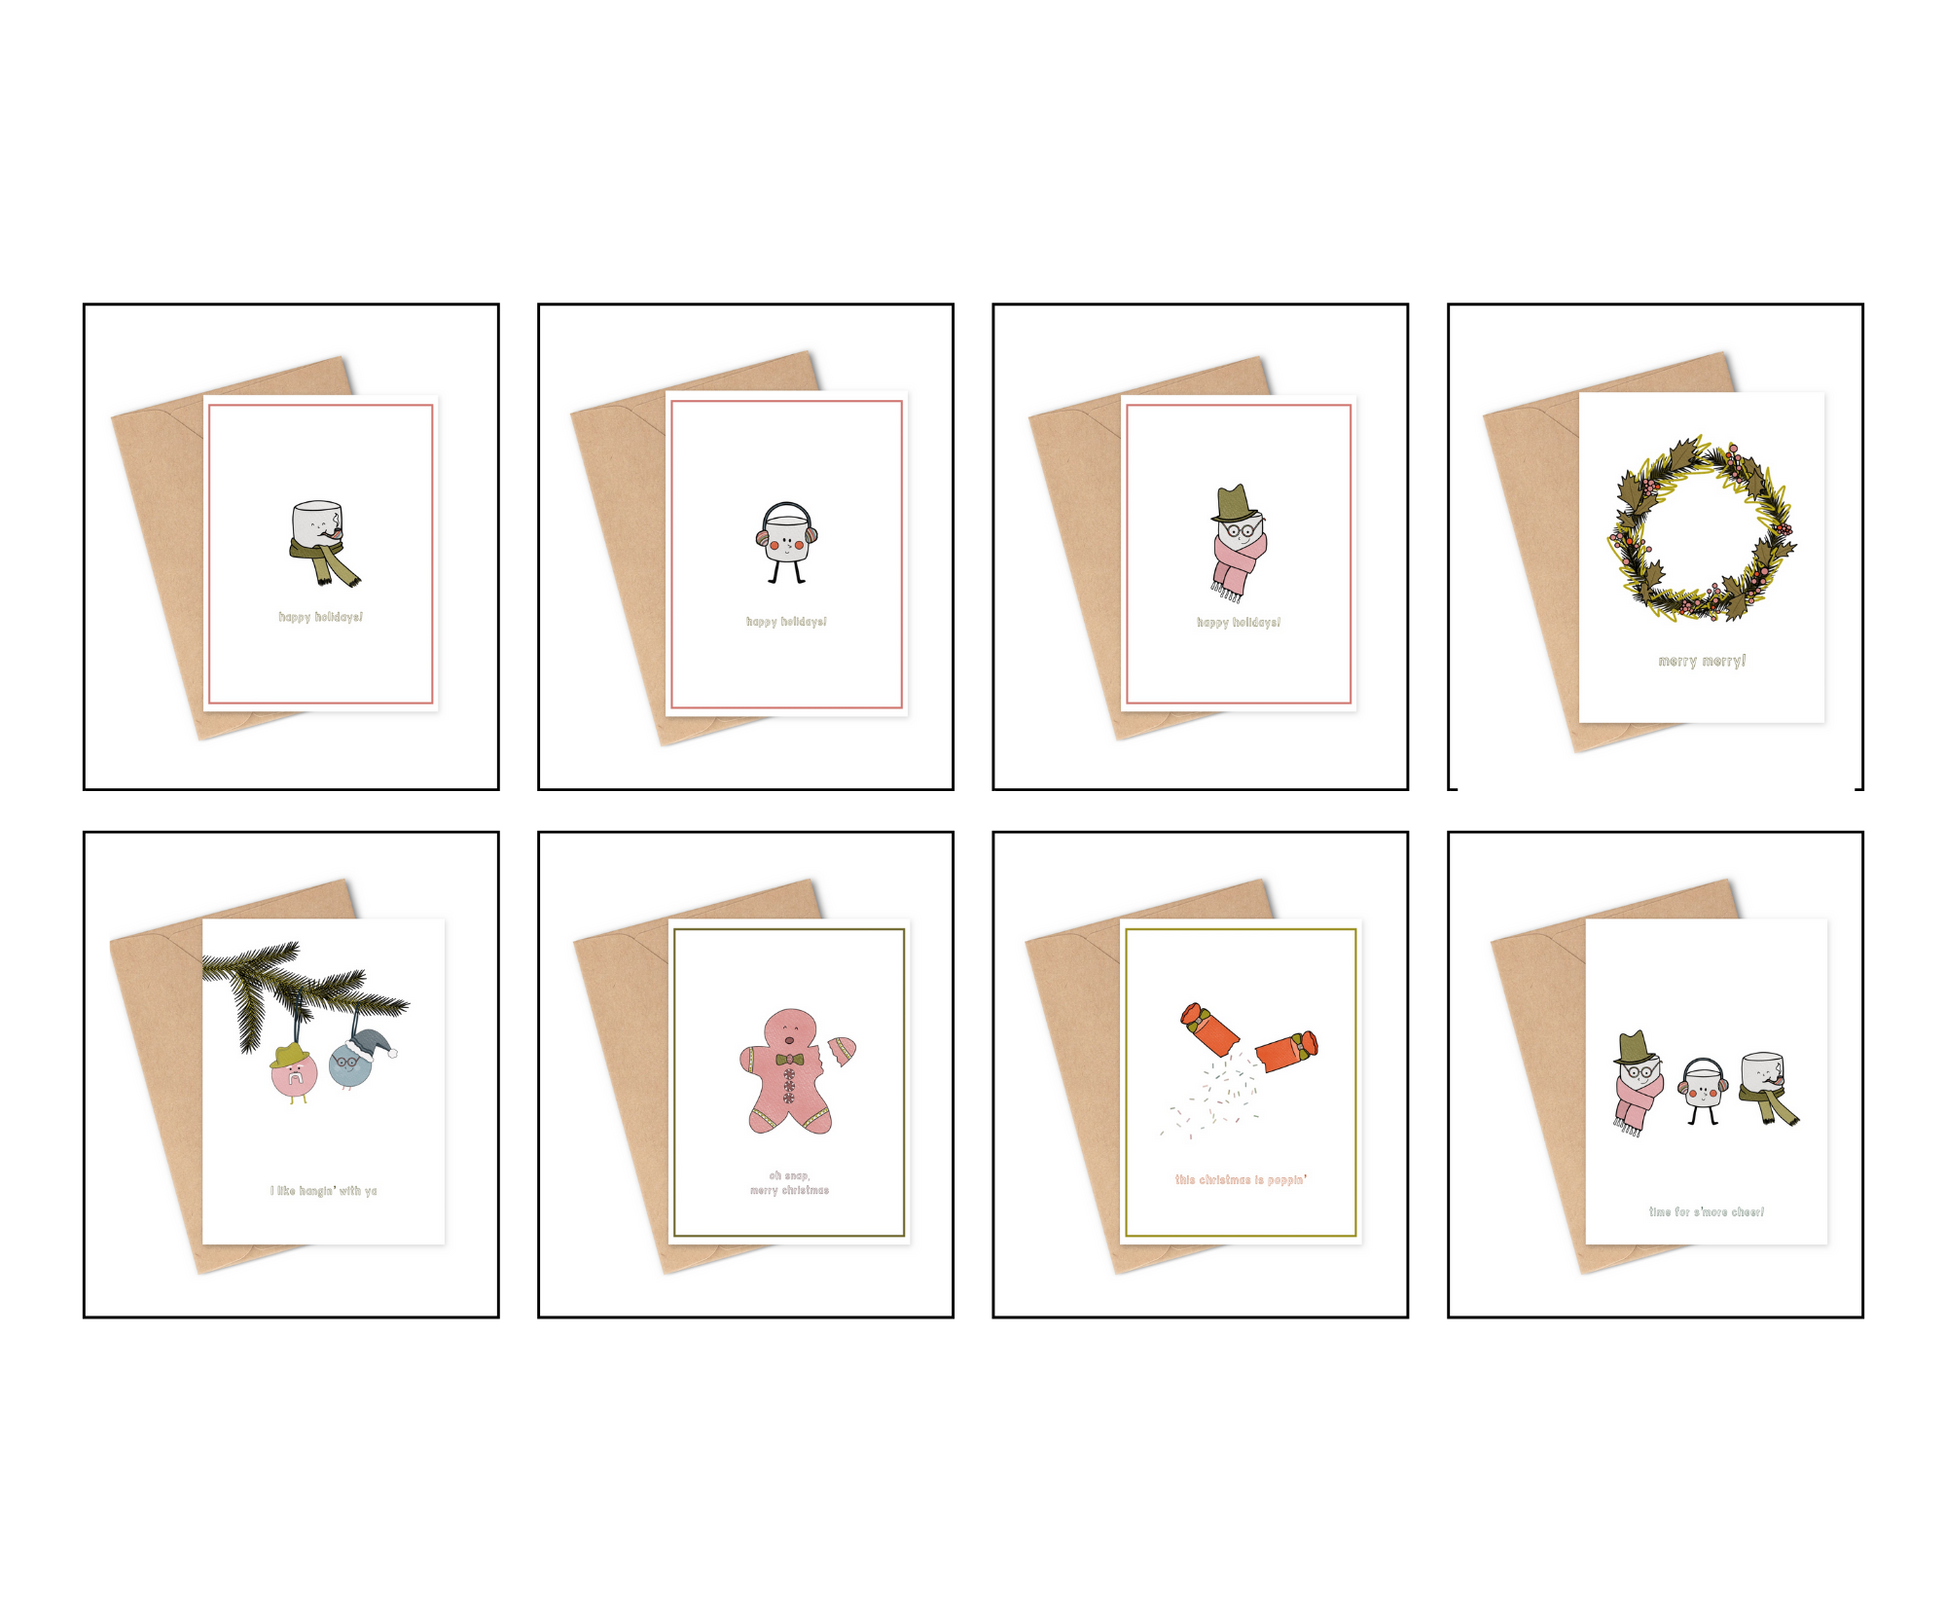 all 8 of the london sisters greeting cards / christmas cards / holiday cards